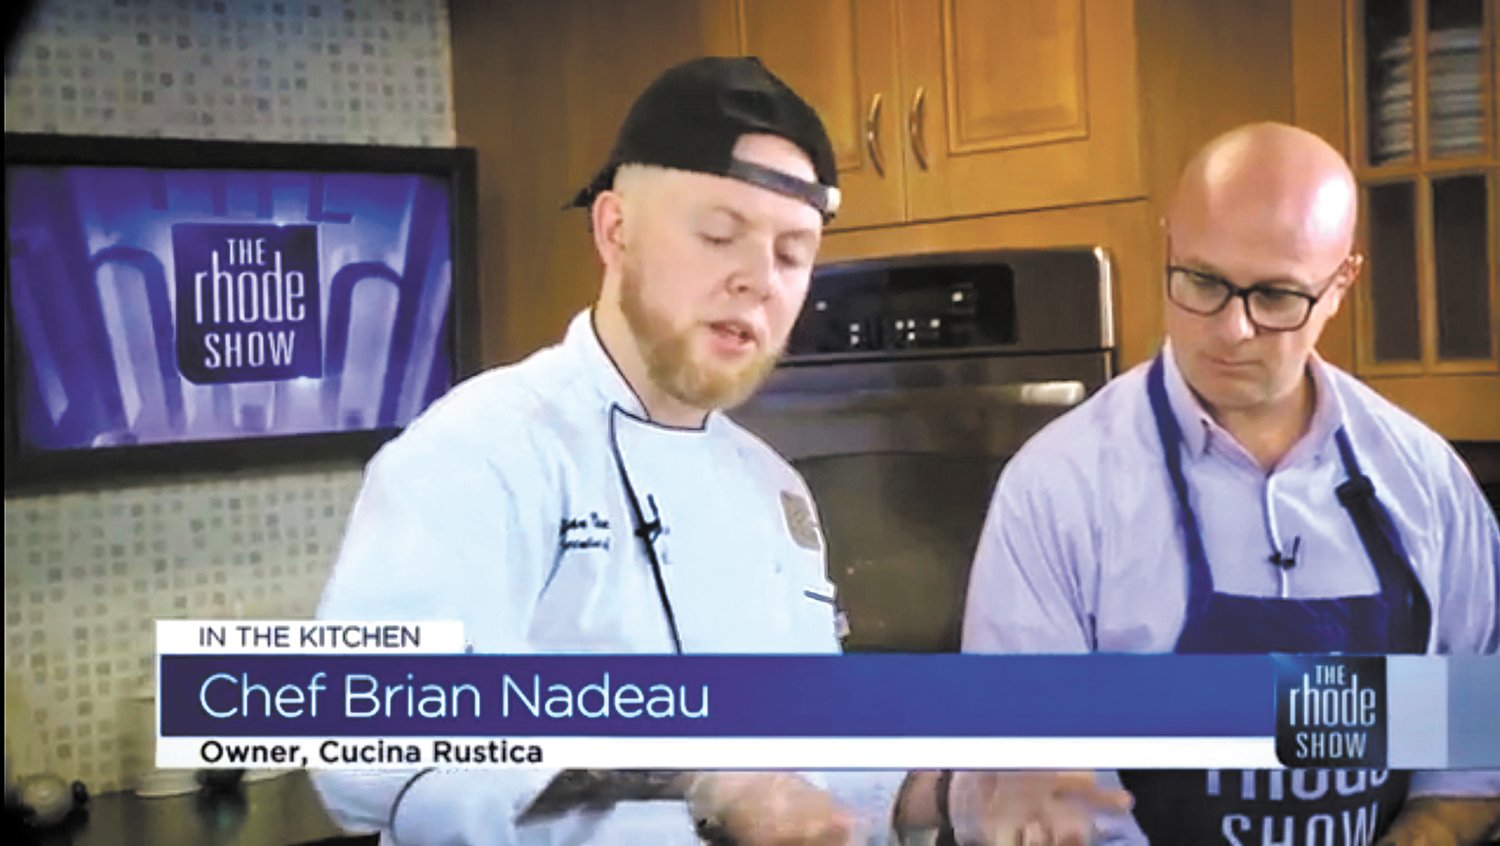 MAKING THE NEWS: Brian Nadeau appears on The Rhode Show with Will Gilbert. (Submitted photo)